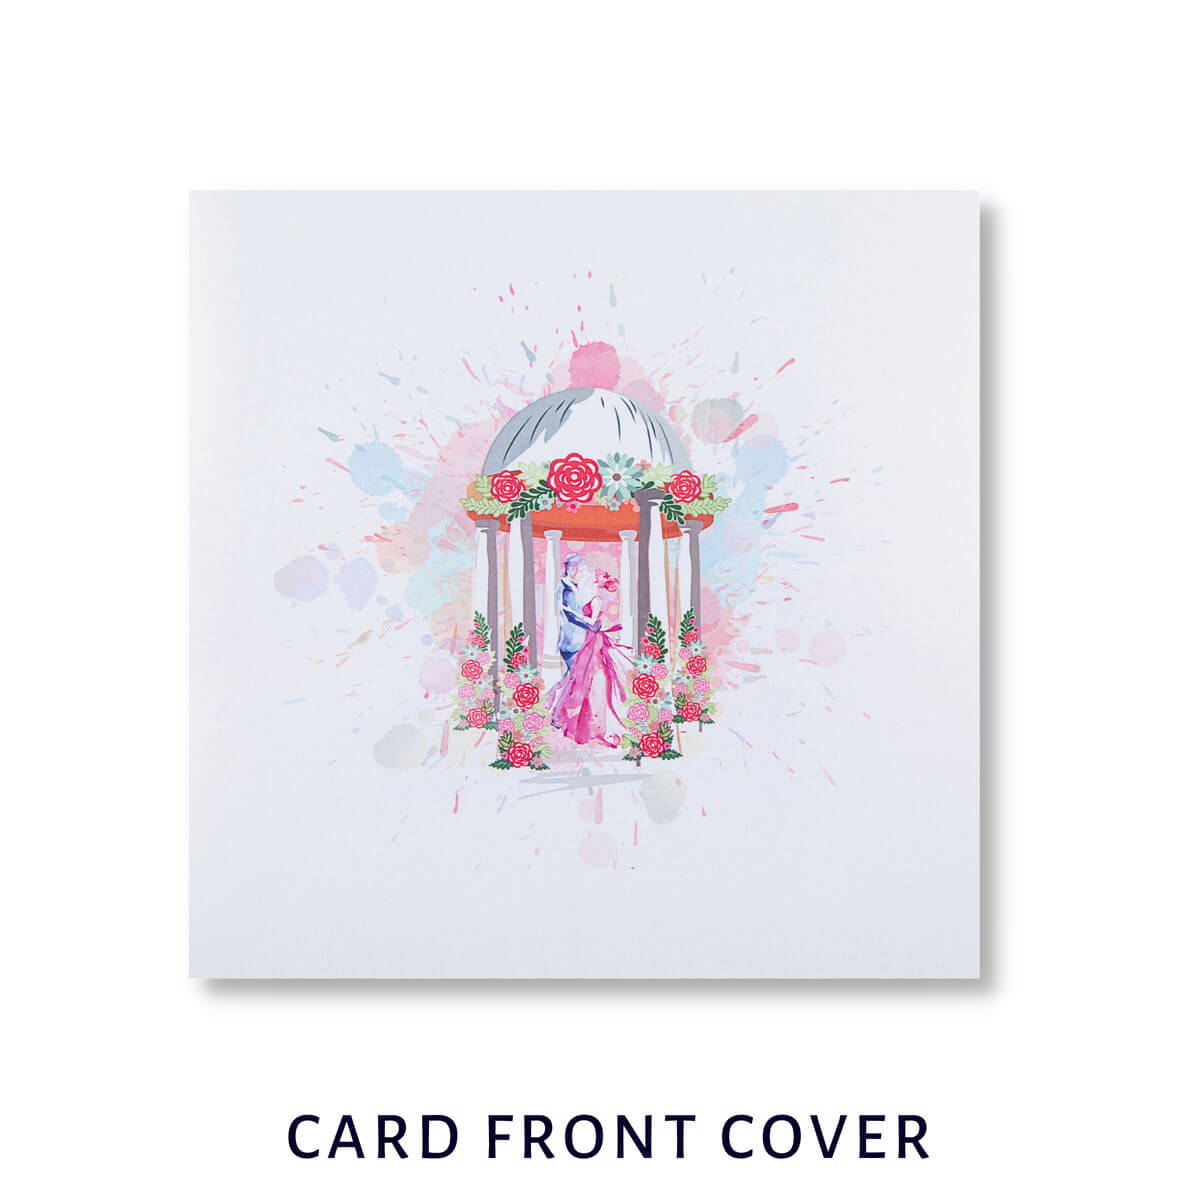 Wedding Pagoda Pop Up Card Cover Image by Cardology